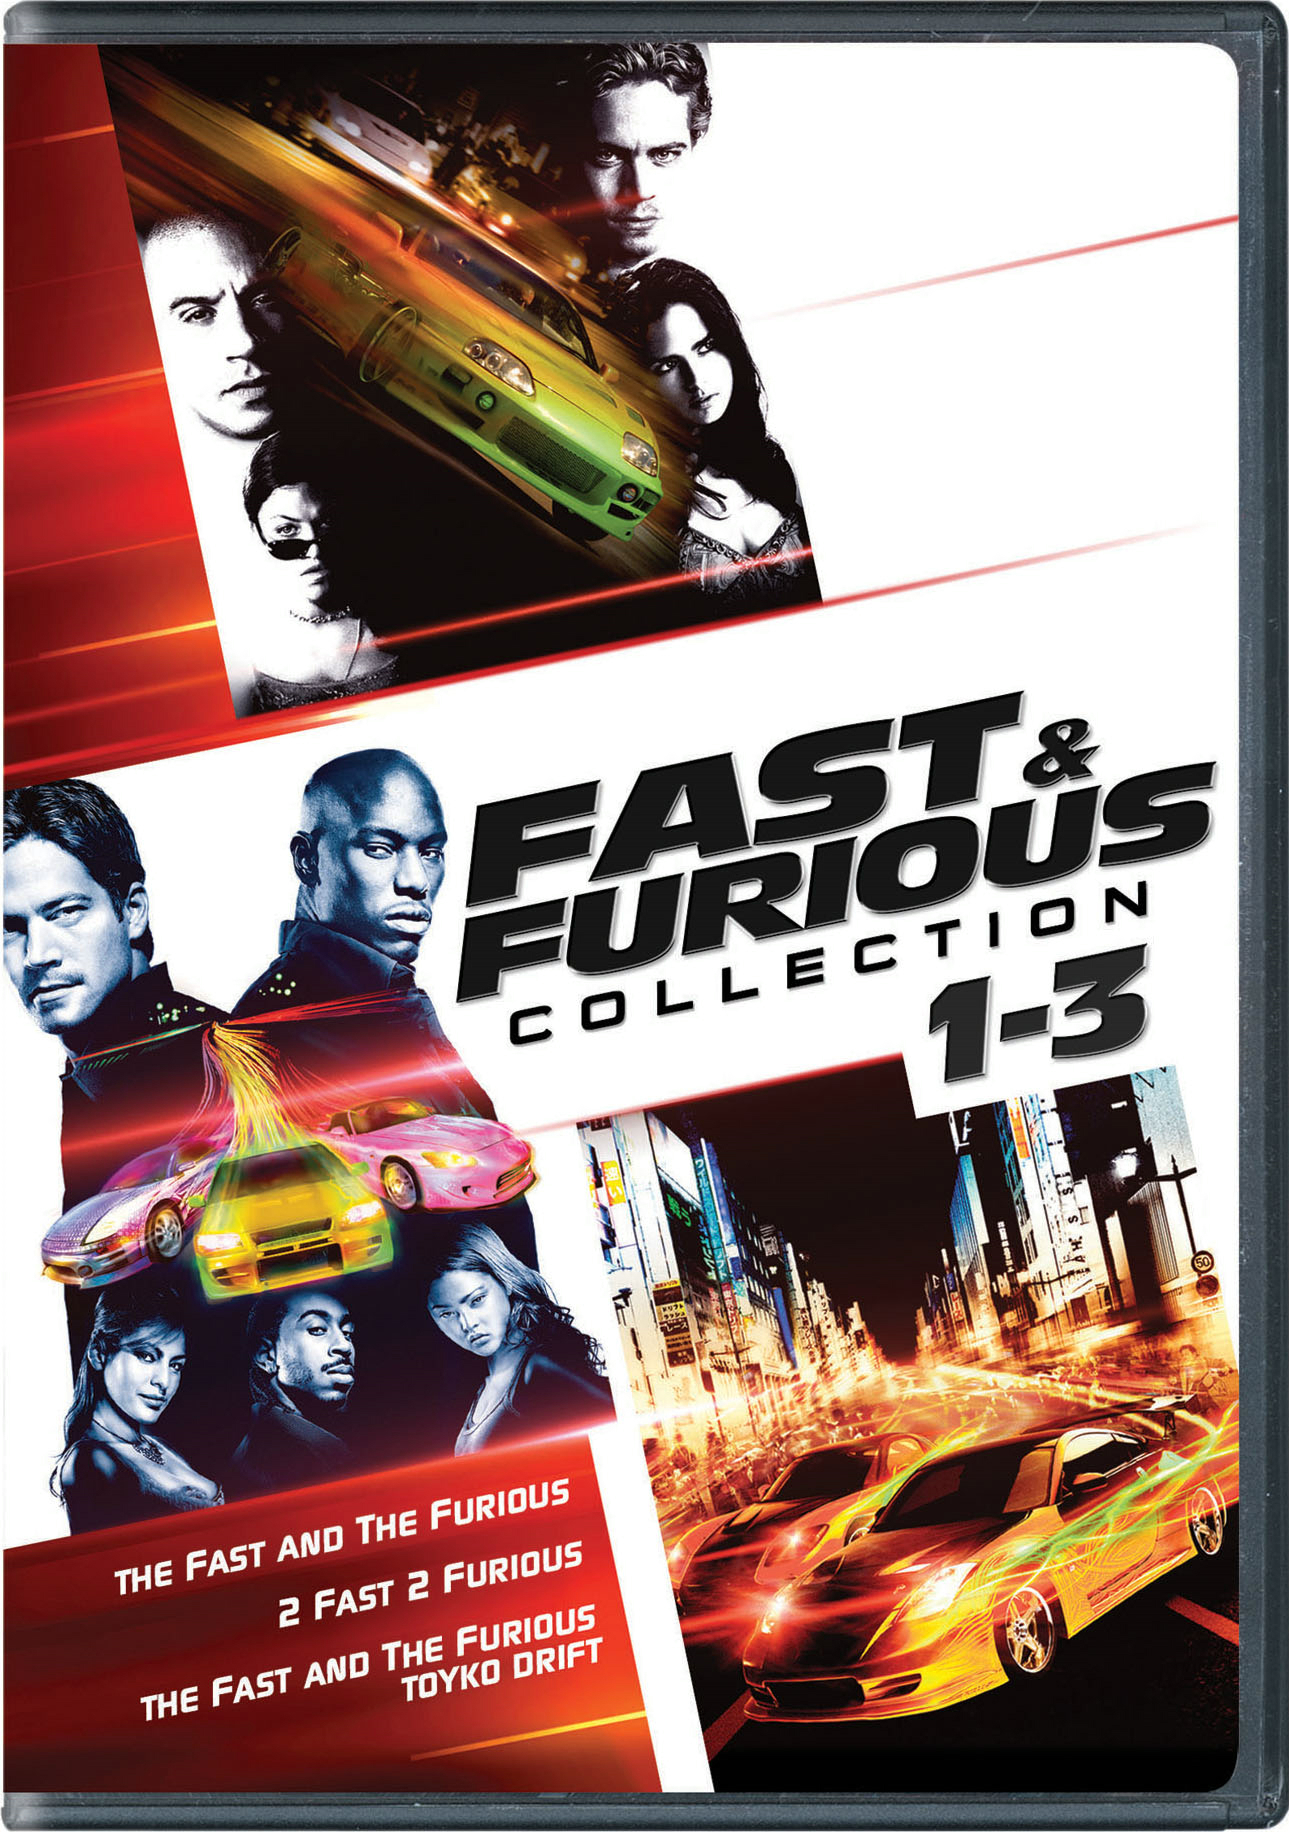 The Fast And The Furious: Tokyo Drift (1 Disc) [DVD]